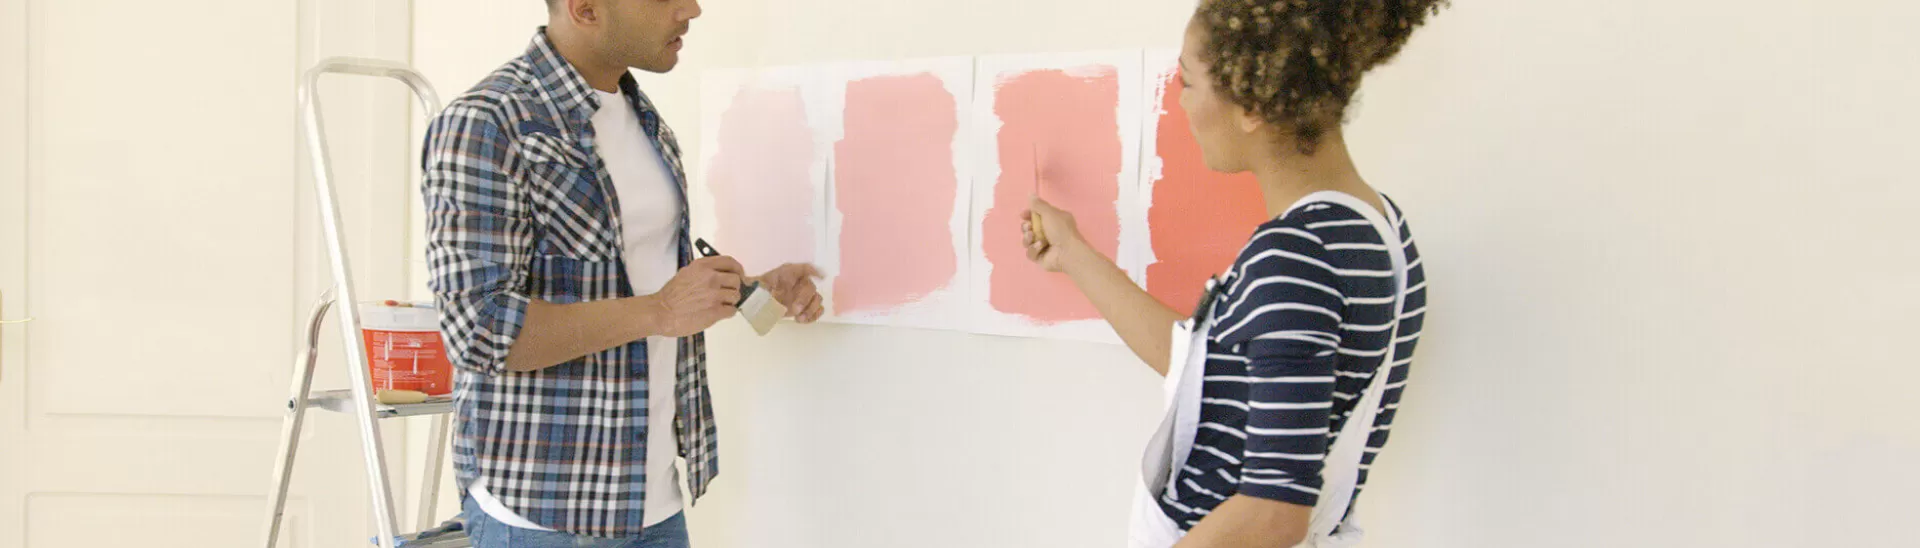 5 TIPS ON CHOSSING THE RIGHT PAINT COLORS FOR YOUR HOME